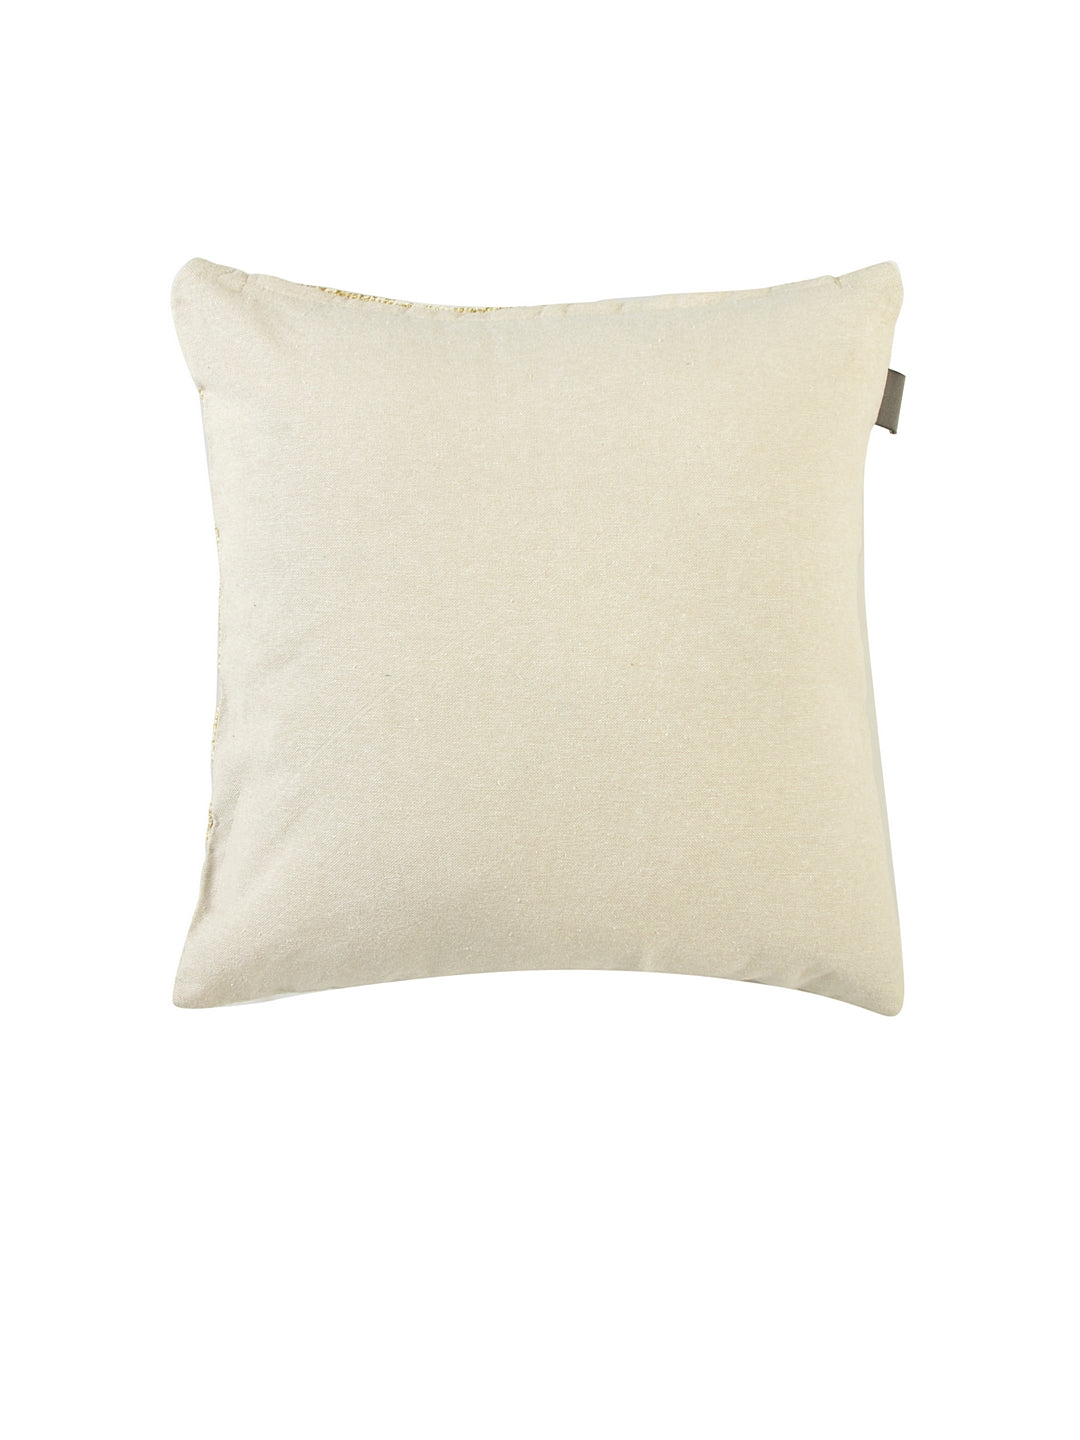 Blanc9 Set of 5 Foil Printed with Solid Tufted 40x40 CM Cushion Covers